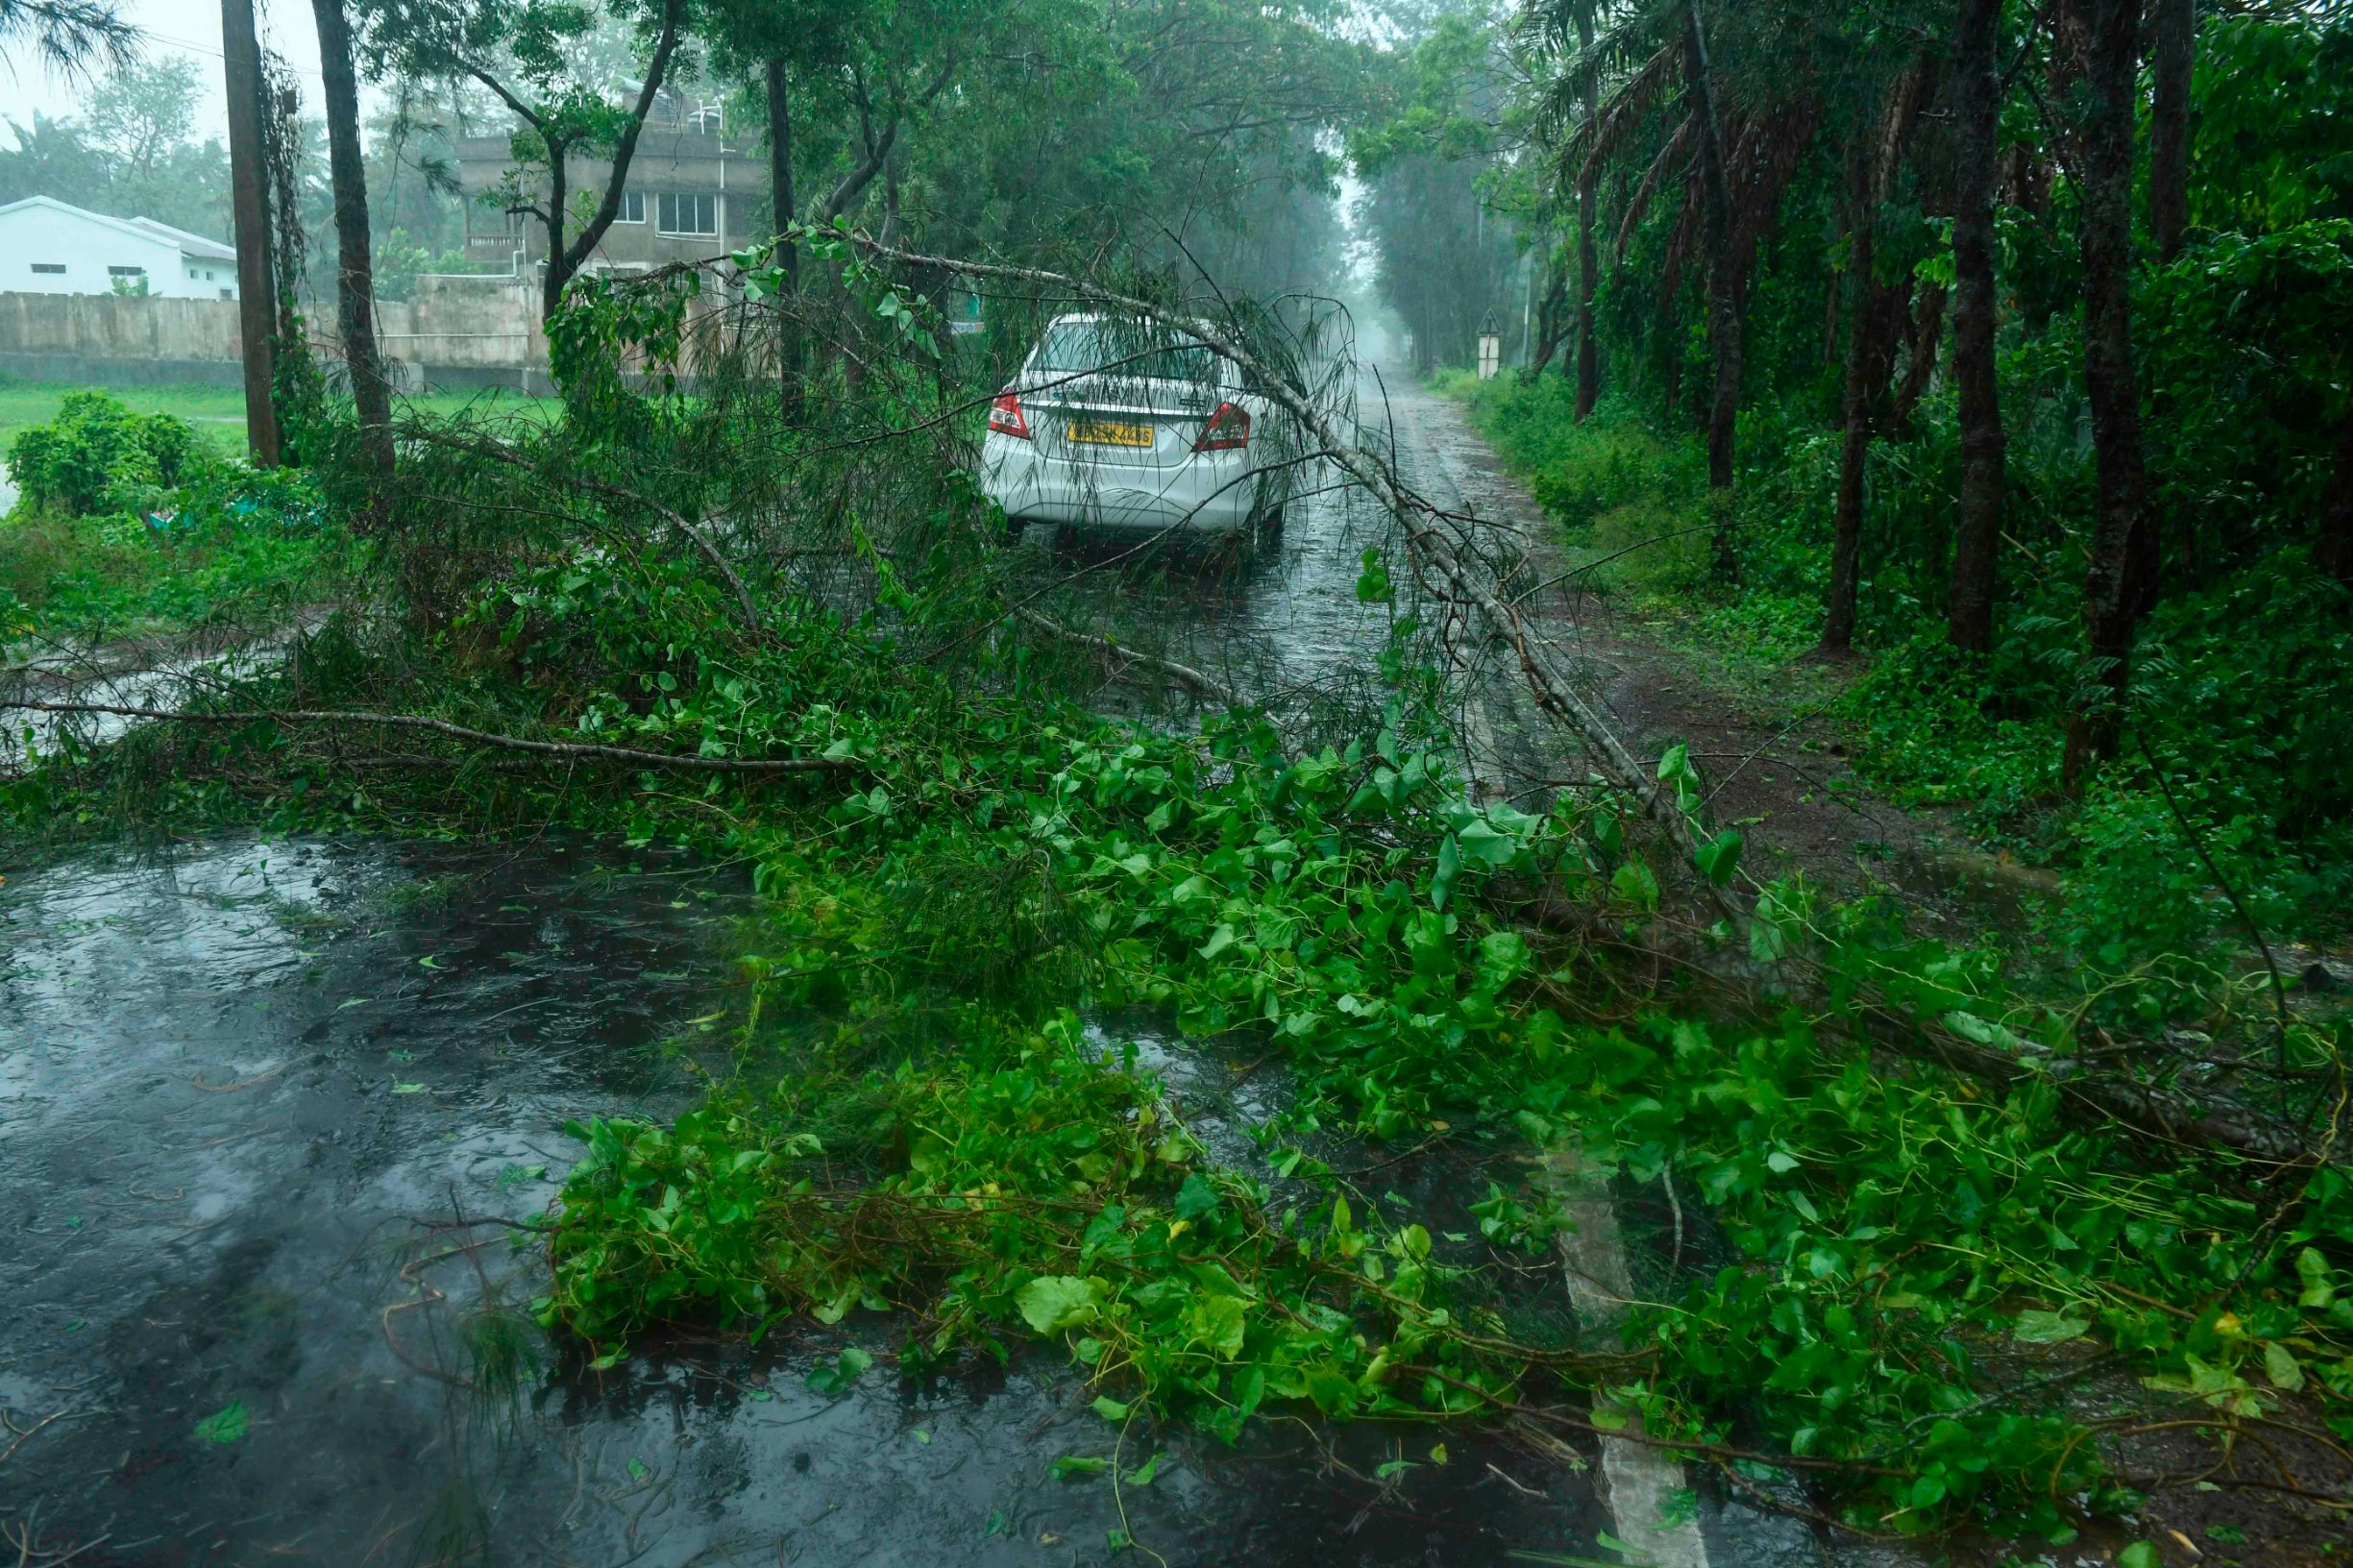 A car drives past fallen tree branches along a road ahead of the expected landfall of cyclone Amphan in Digha, West Bengal, on May 20, 2020. - India and Bangladesh began evacuating more than two million people on May 18 as a cyclone barrelled towards their coasts, with officials racing to ready extra shelters amid fears of coronavirus contagion in cramped refuges. (Photo by Dibyangshu SARKAR / AFP)